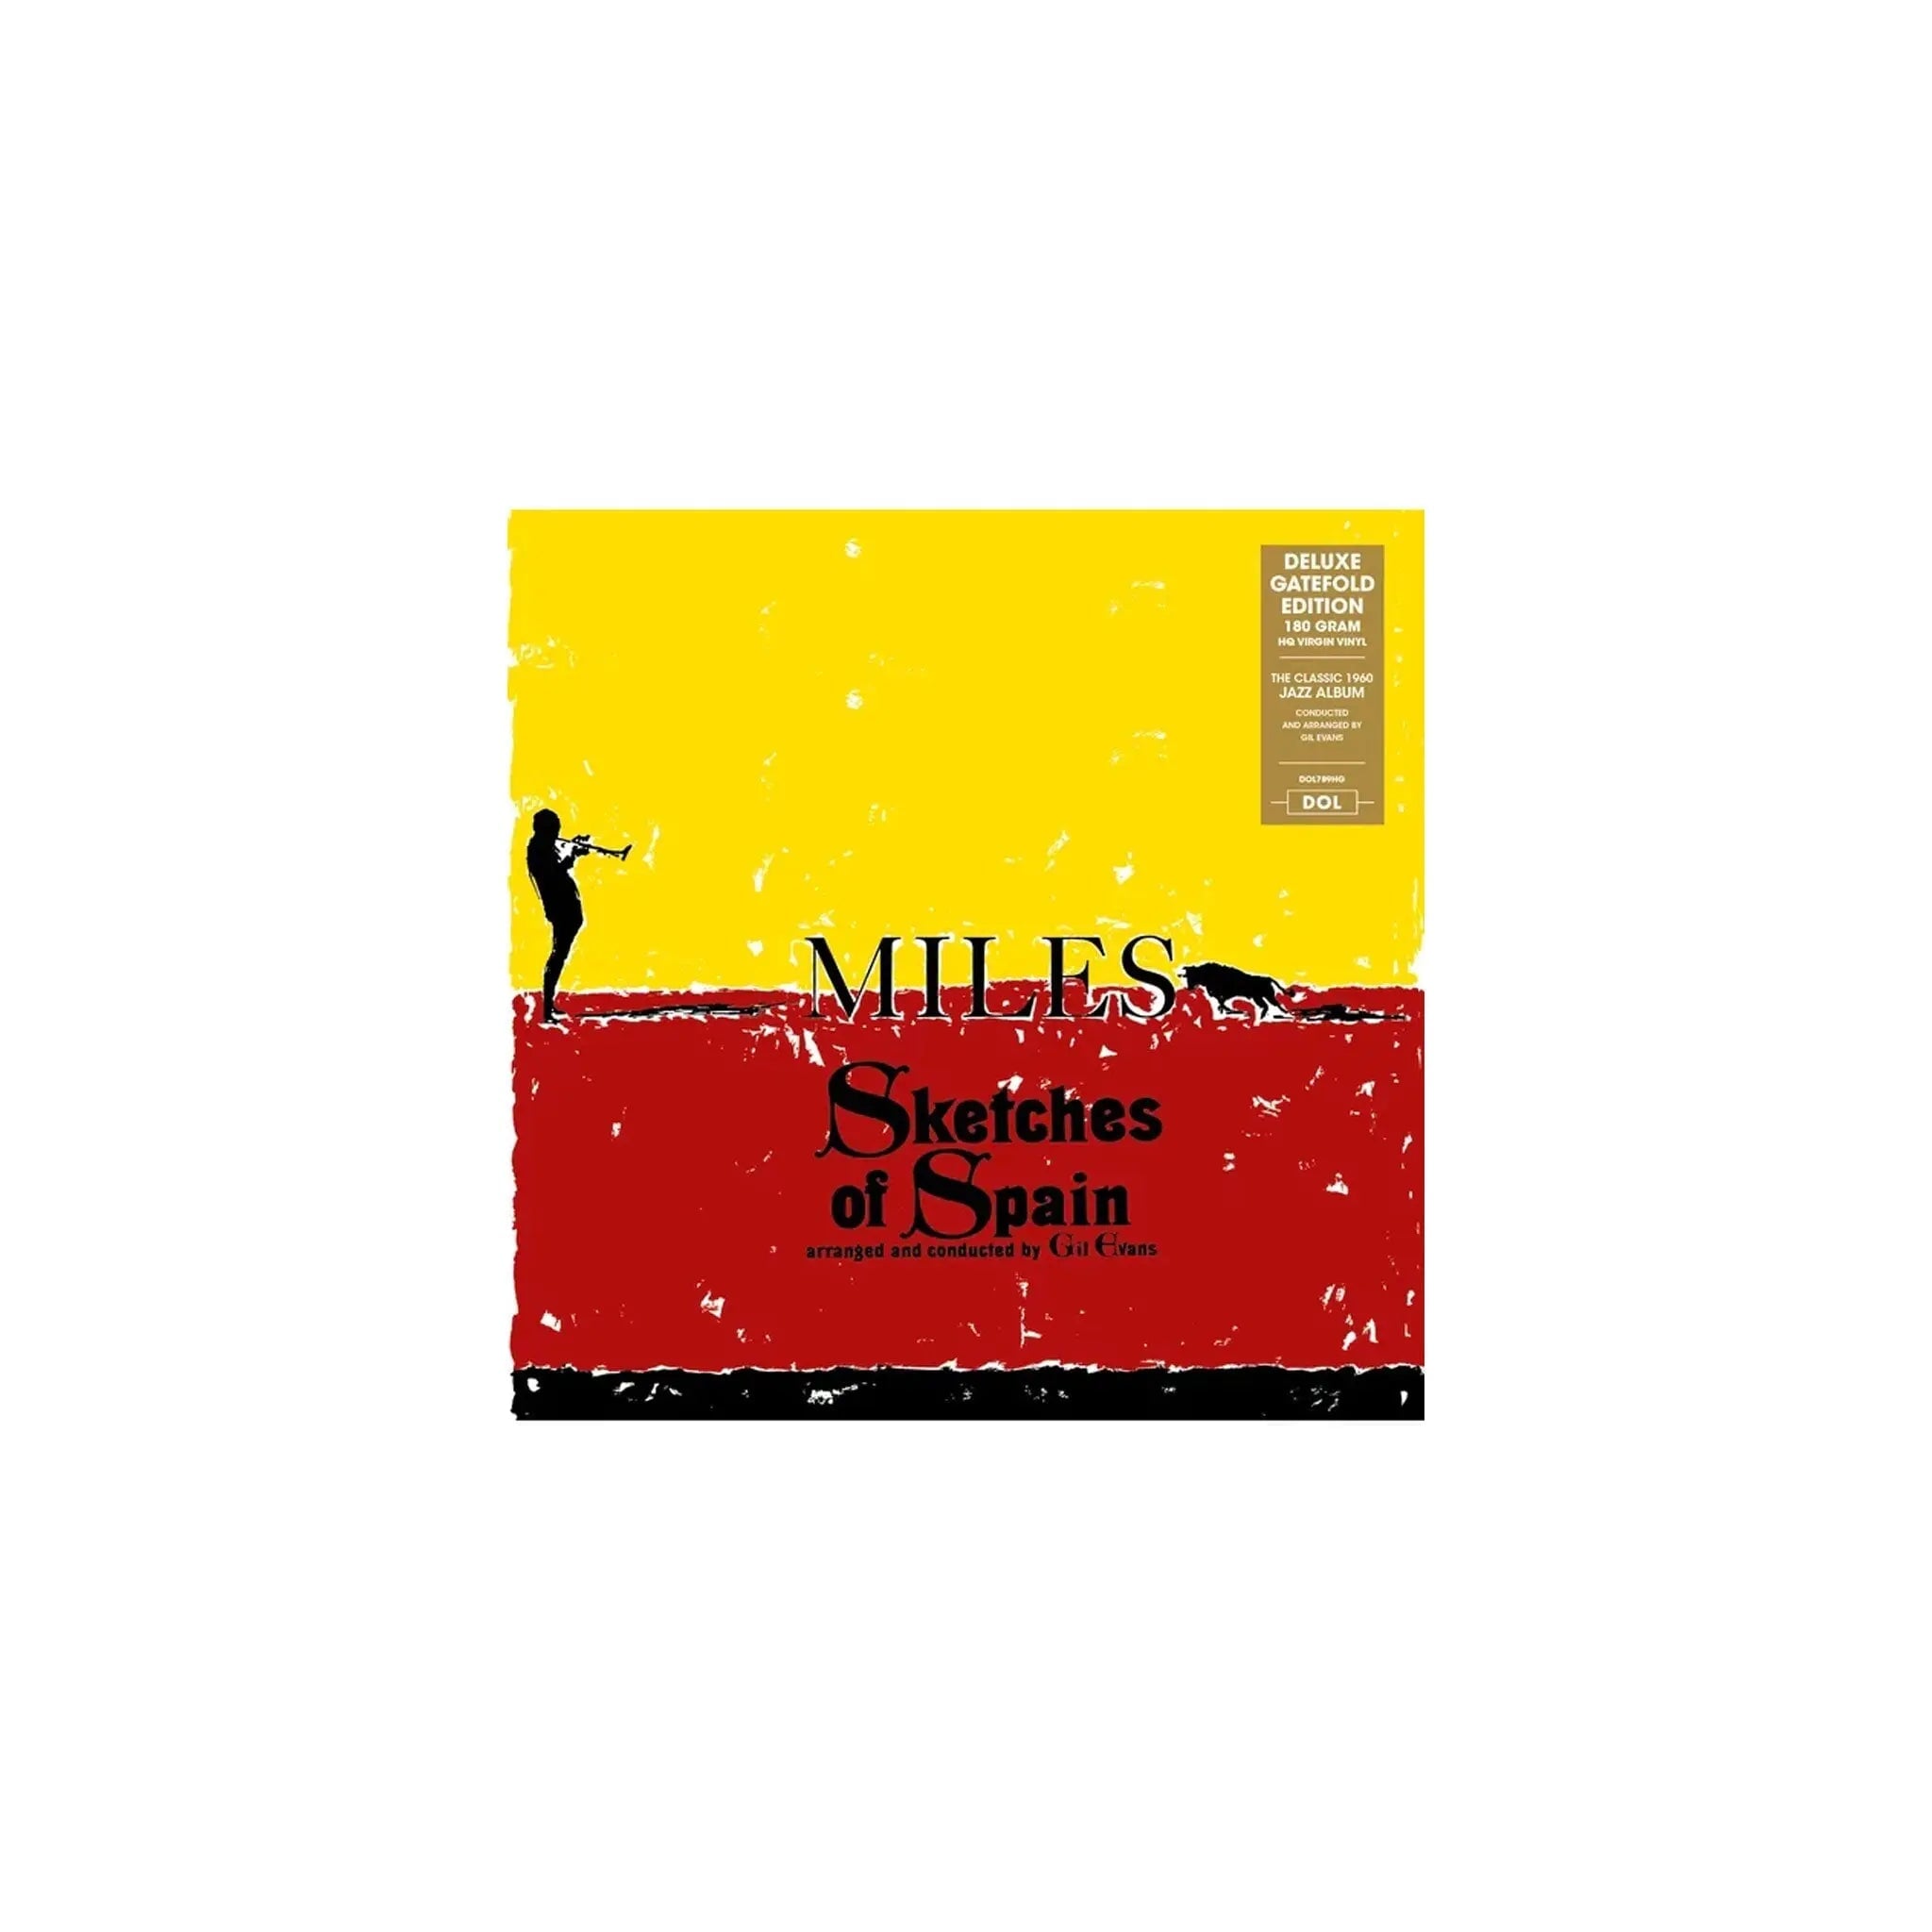 MILES DAVIS sketches of spain  the pan piper  saeta  solea LP for sale  on groovecollectorcom